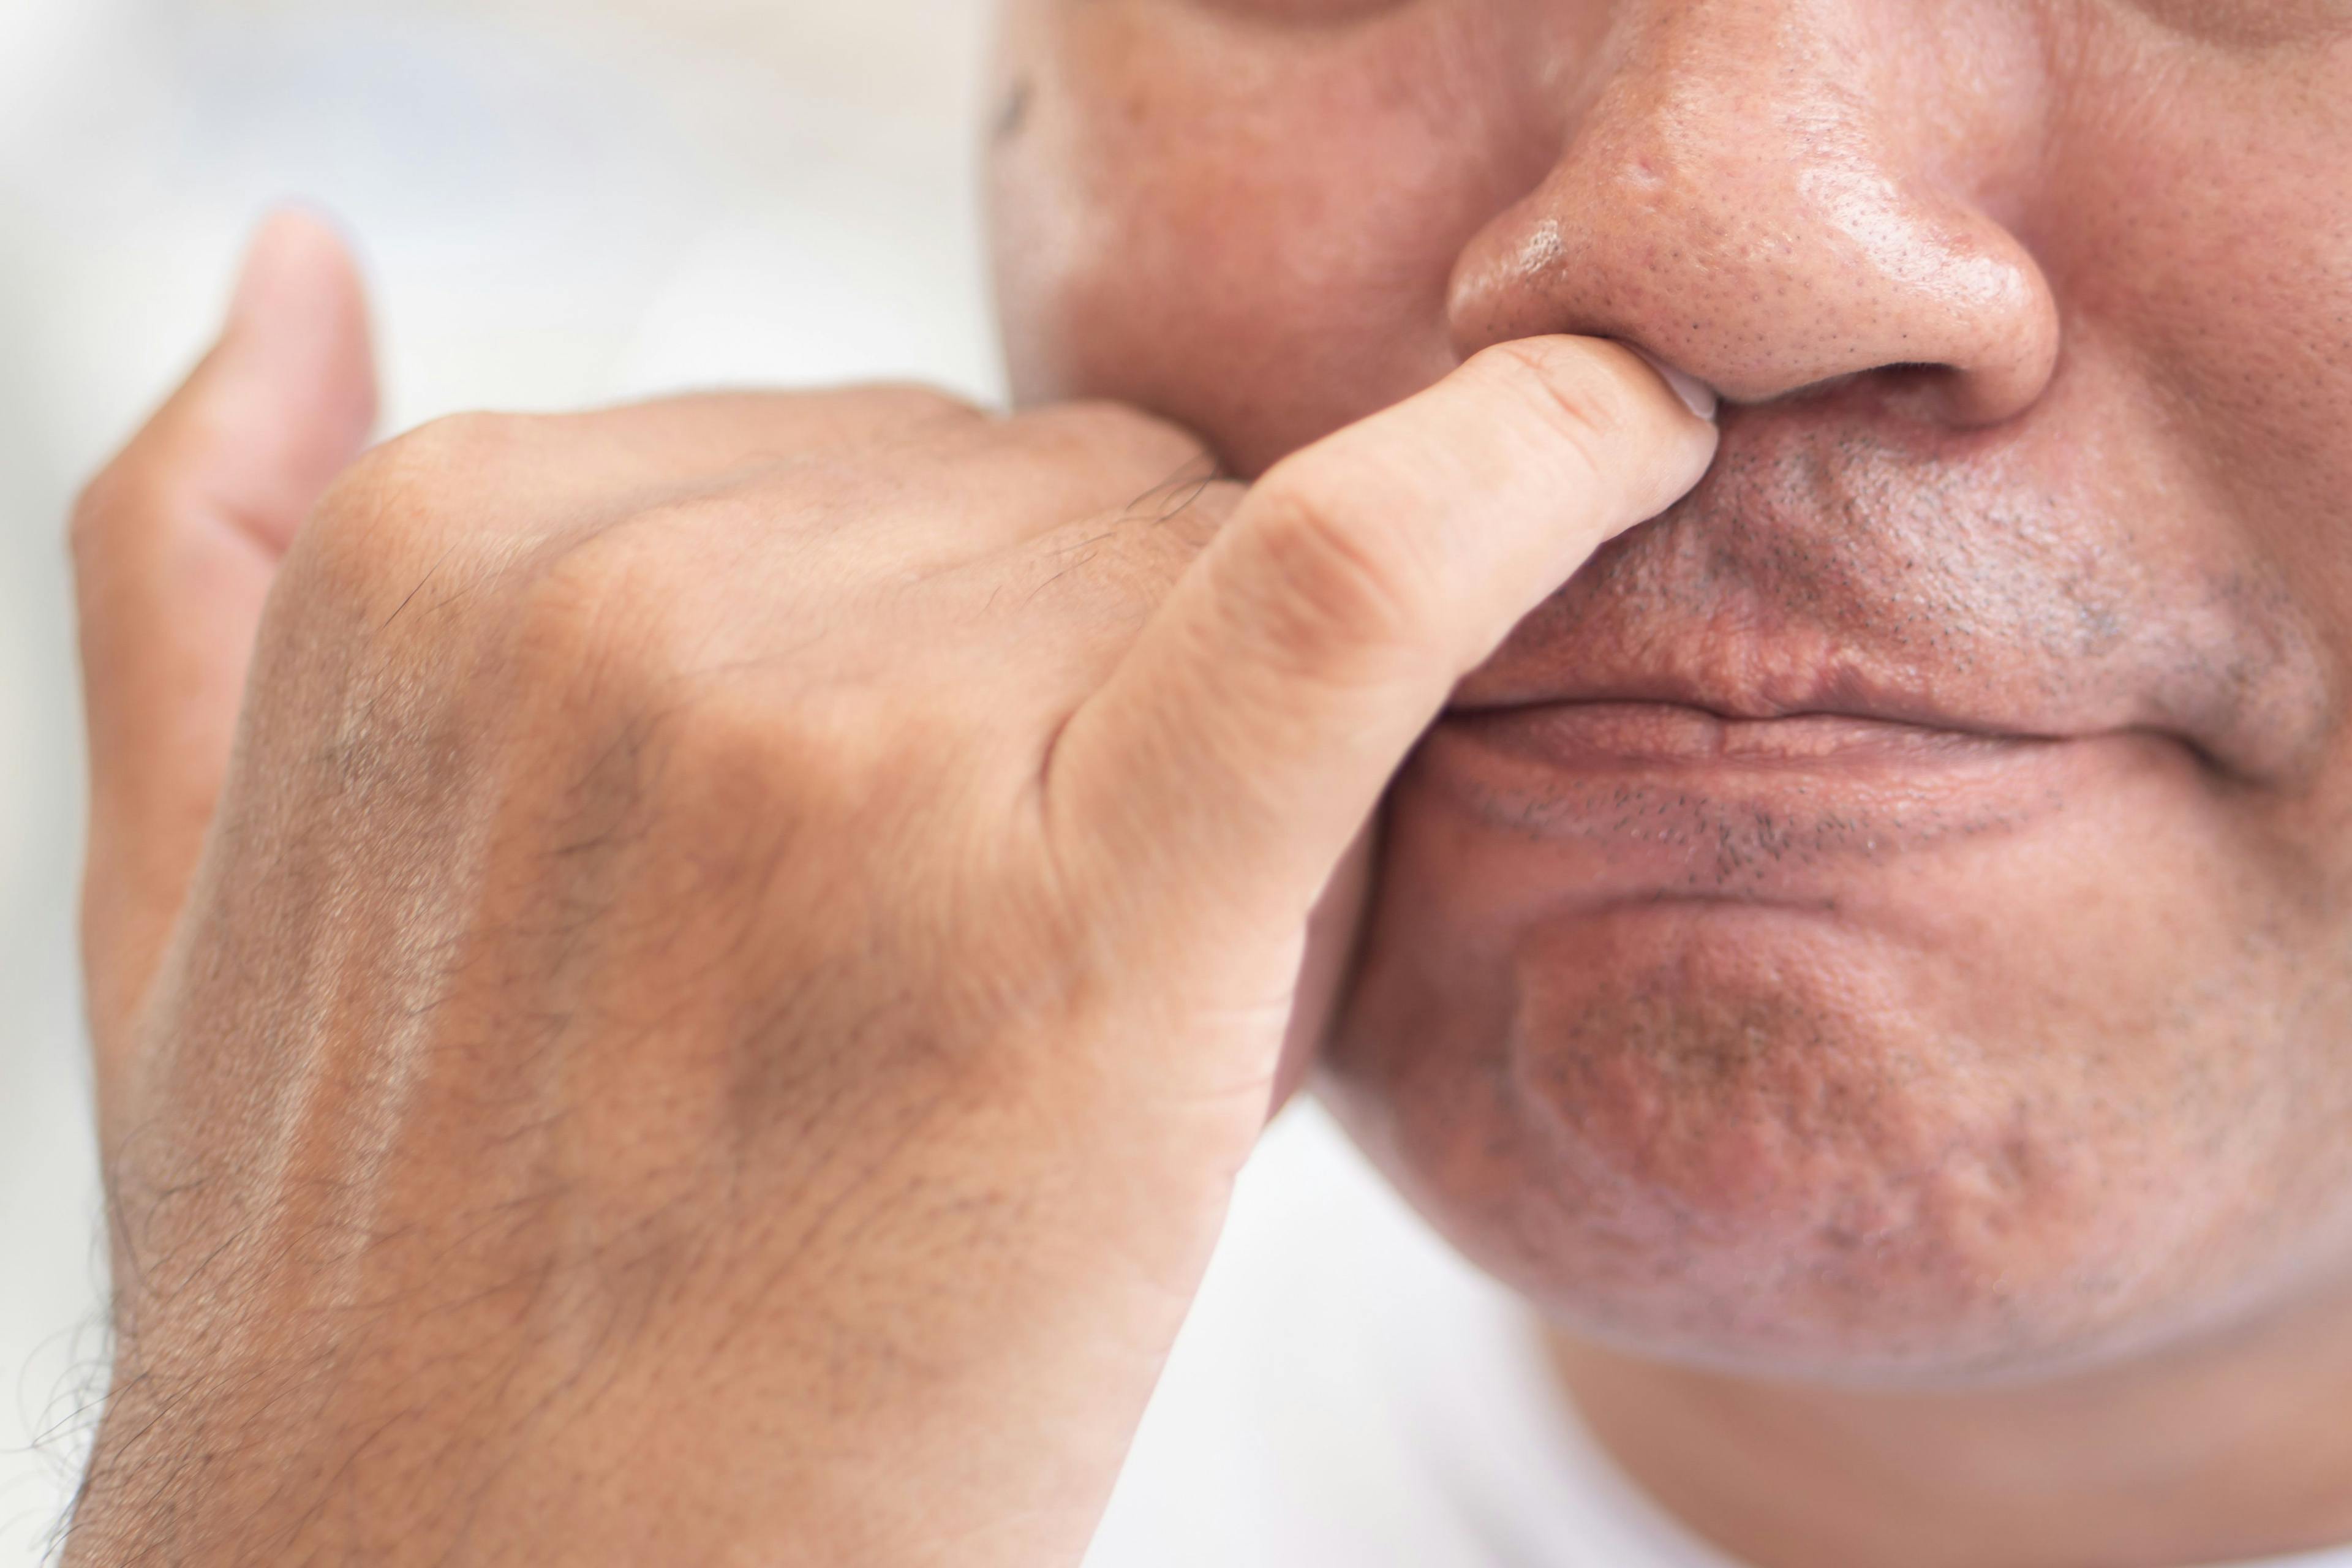 Nose Picking Among Health Care Workers Associated With Increased Risk of SARS-CoV-2